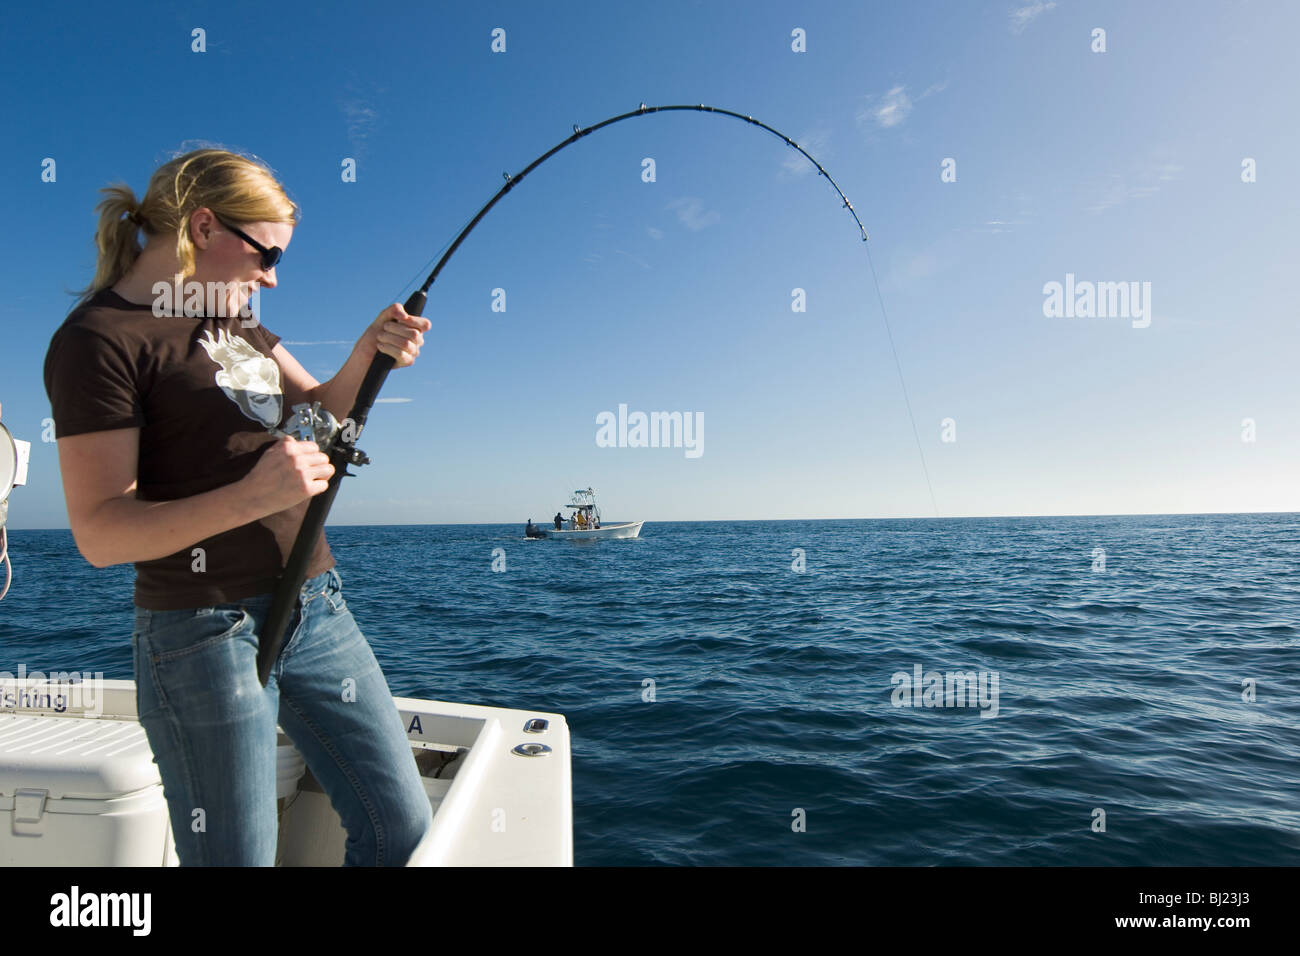 Woman fishing from a boat Stock Photo